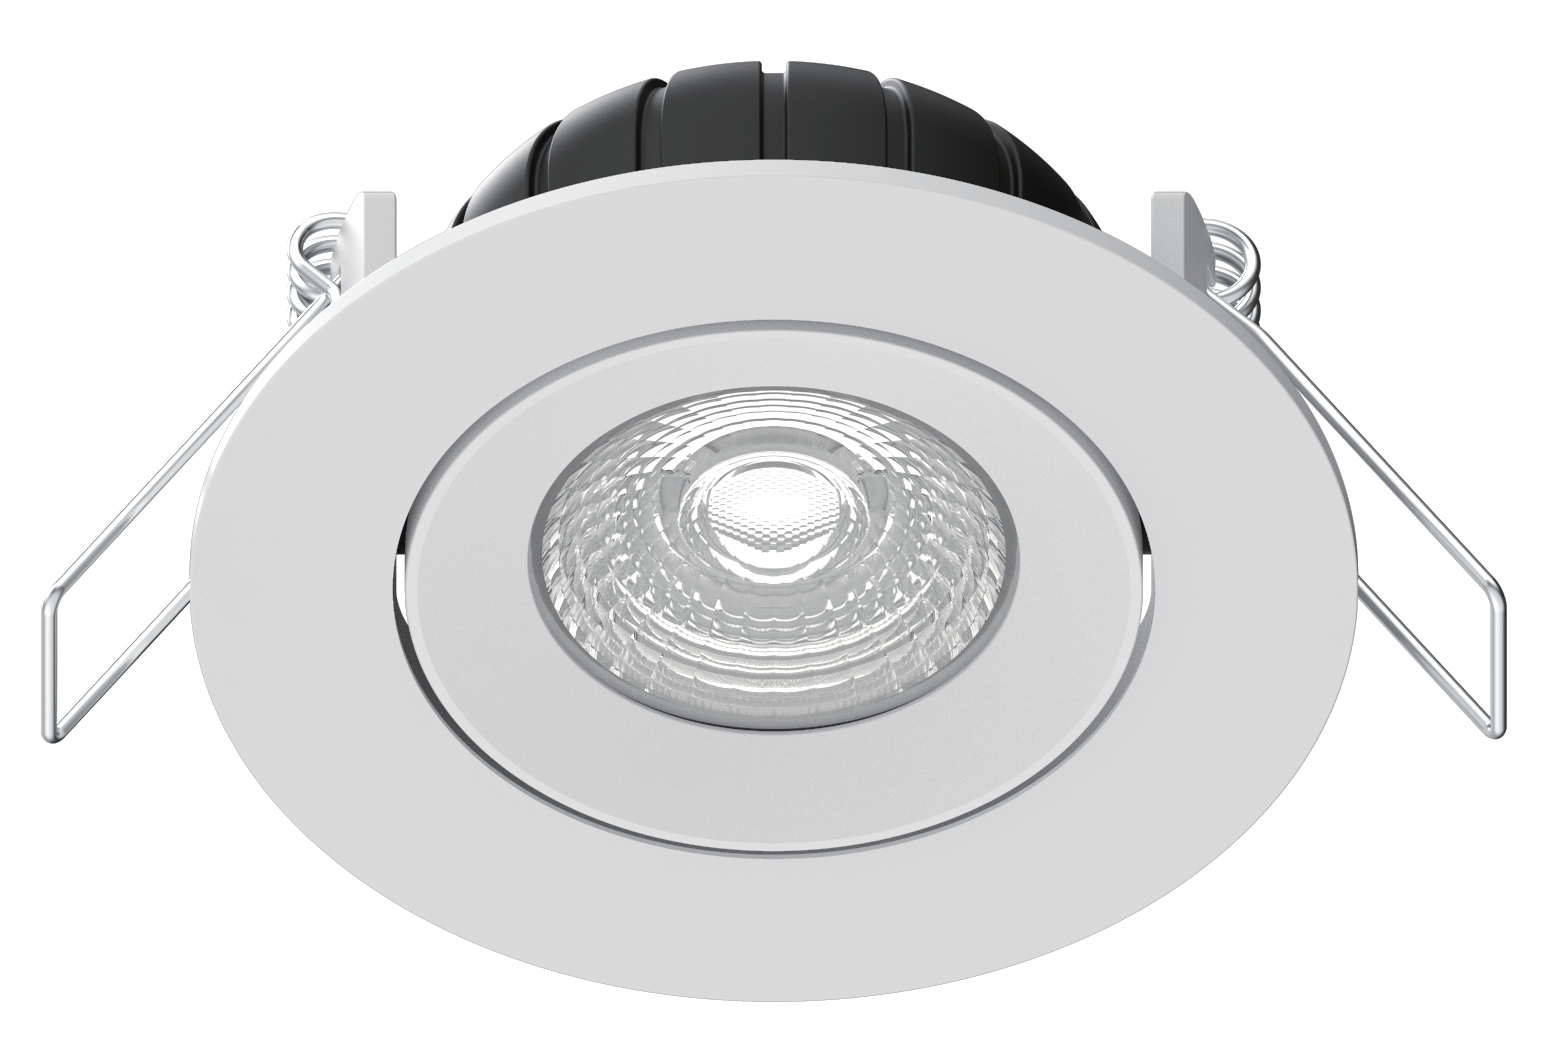 7W ferstelbere Led downlight IP20 front 3CCT switchable